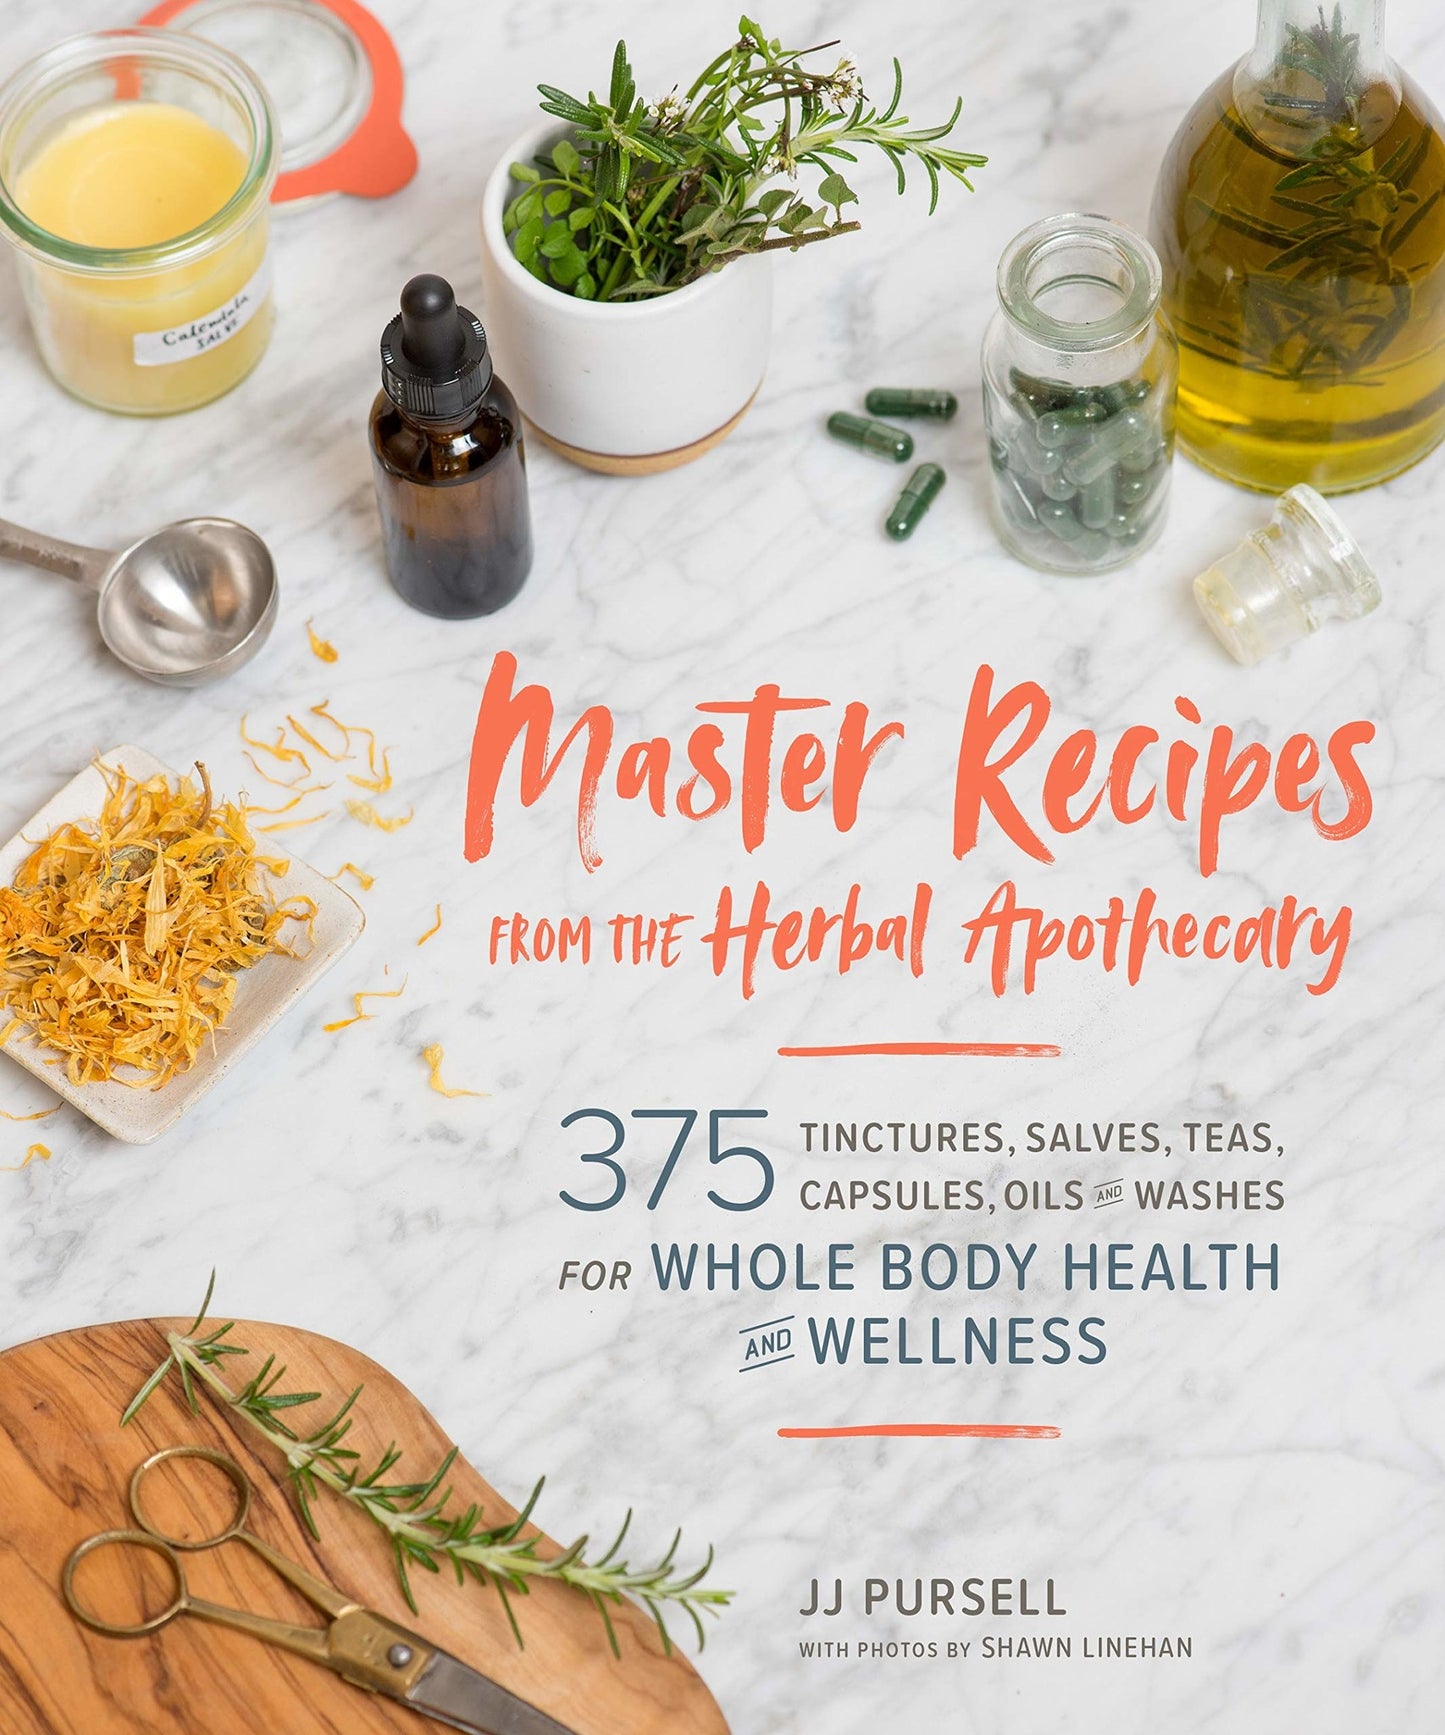 Master Recipes from the Herbal Apothecary: 375 Tinctures, Salves, Teas, Capsules, Oils, and Washes for Whole Body Health and Wellness - JJ Pursell